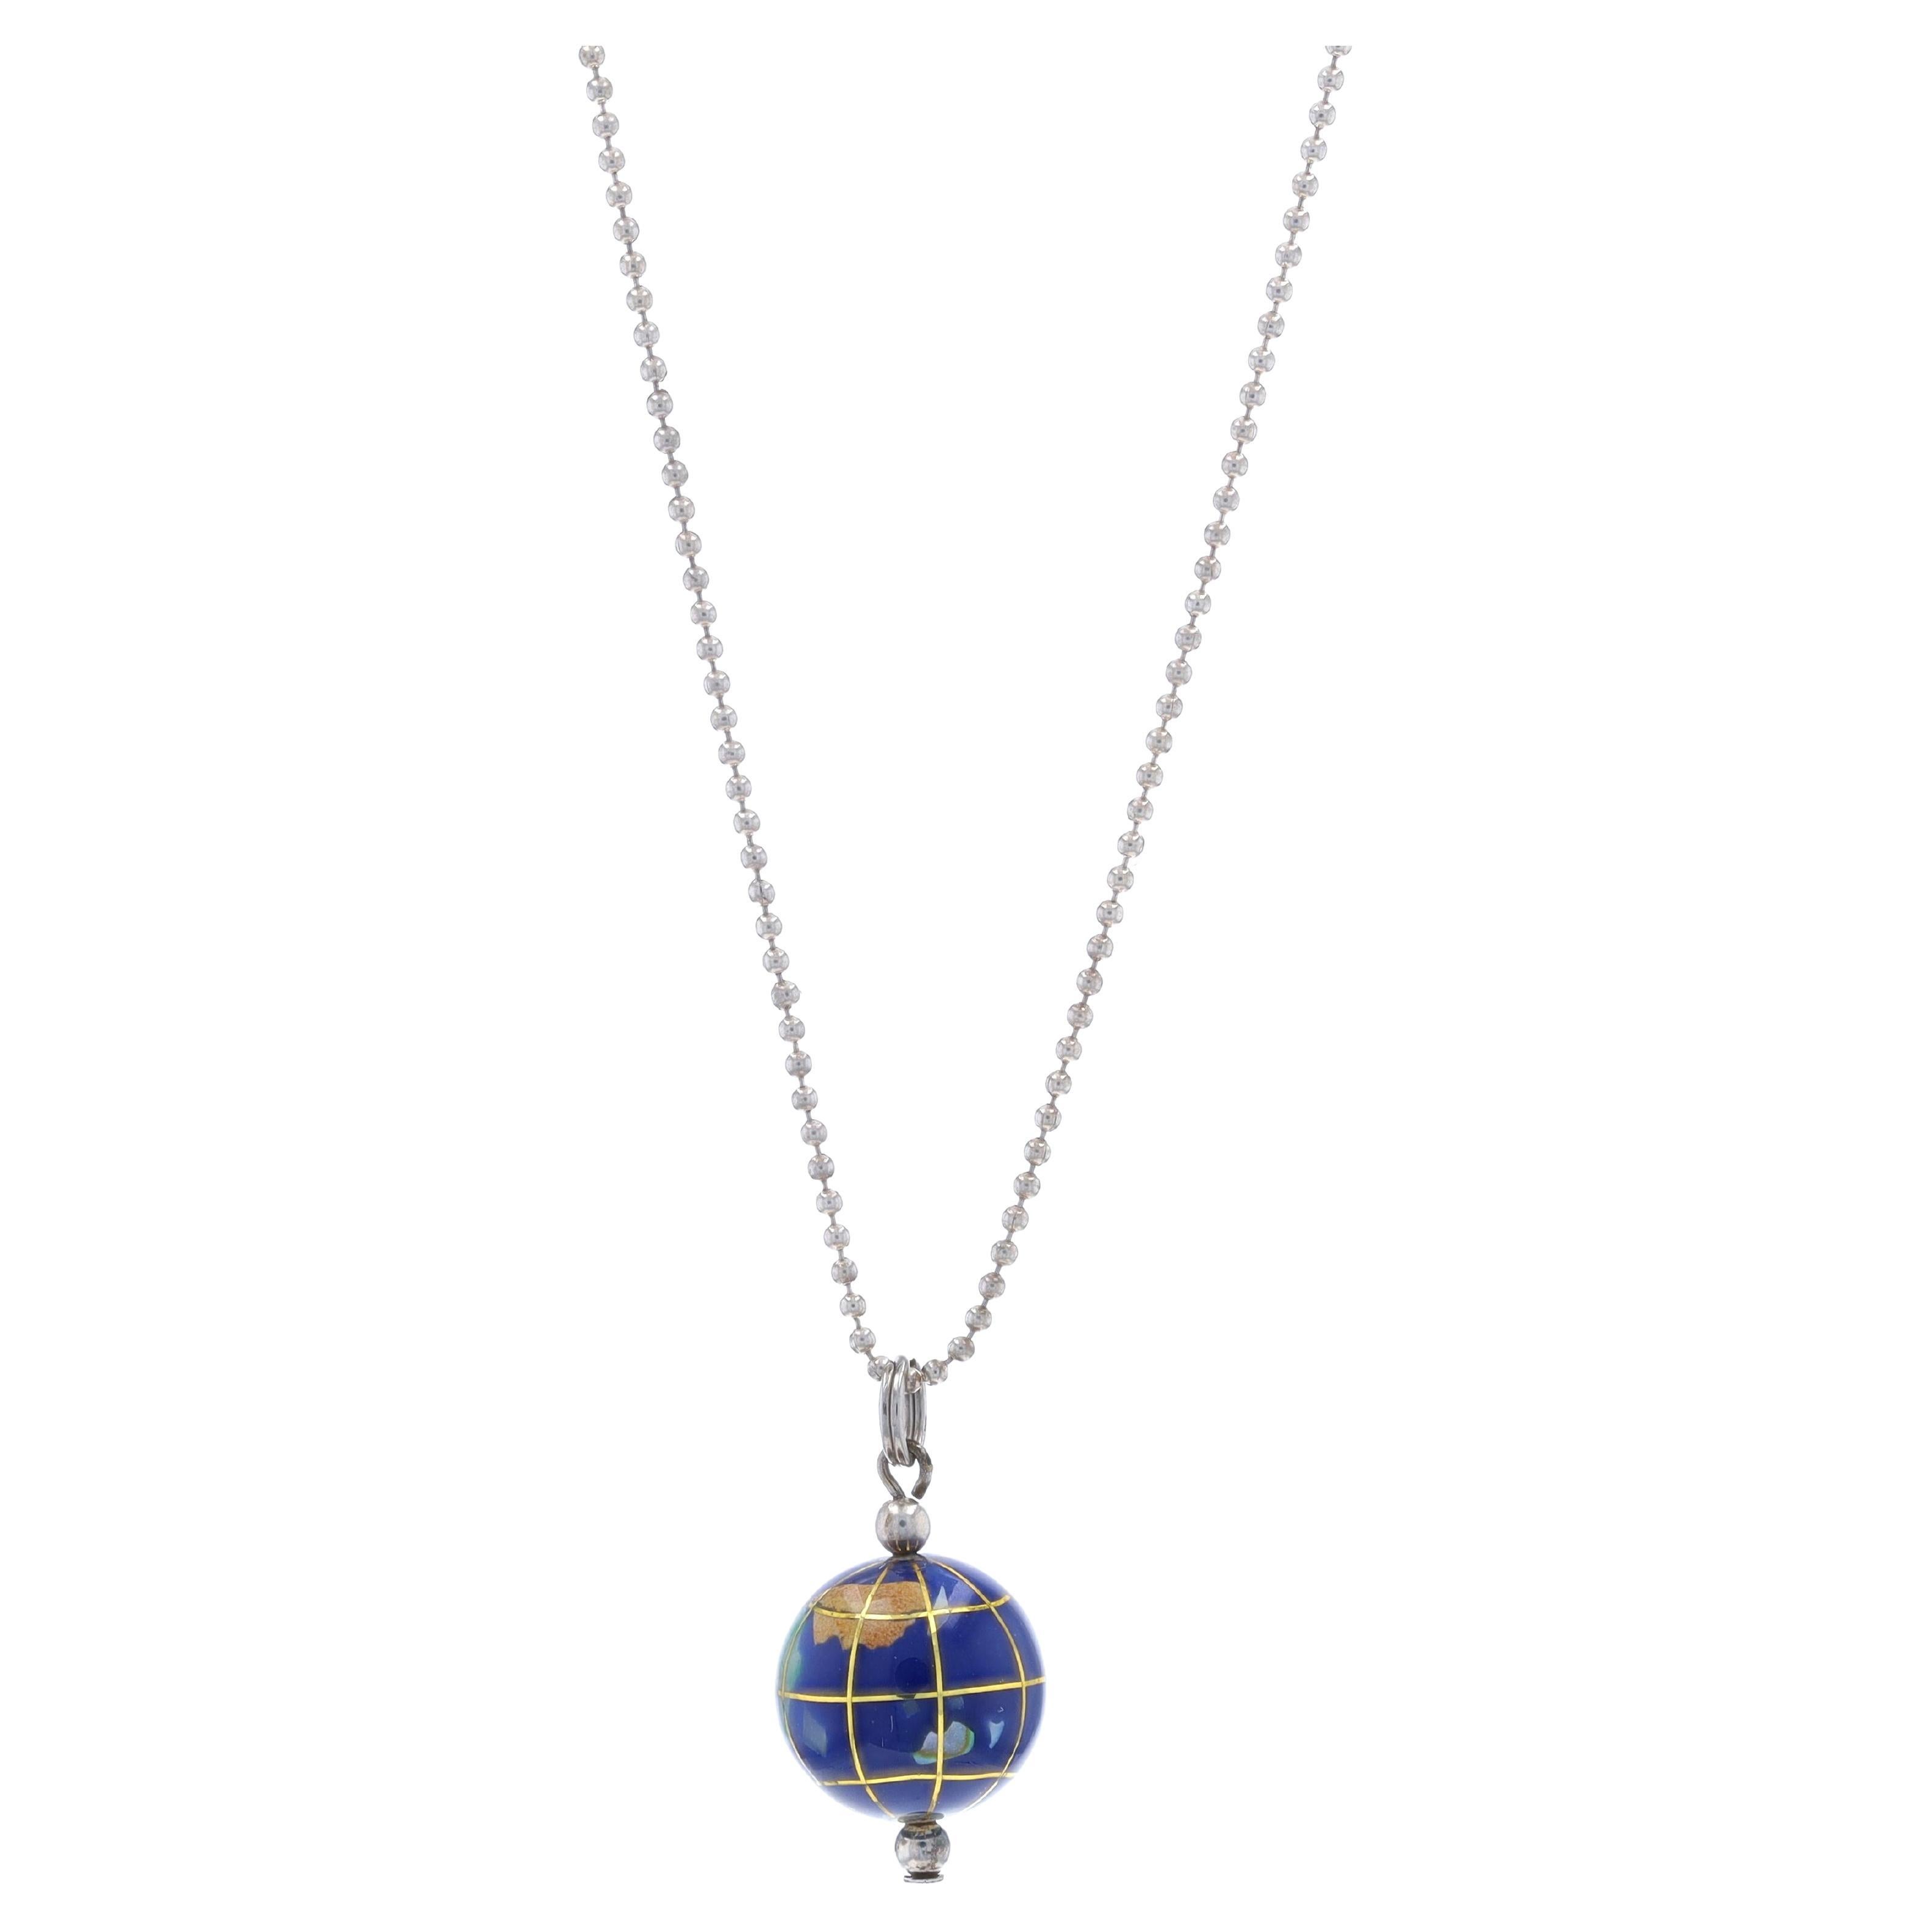 Sterling Silver Gemstone World Globe Pendant Necklace 19 1/2" - 925 Planet Earth